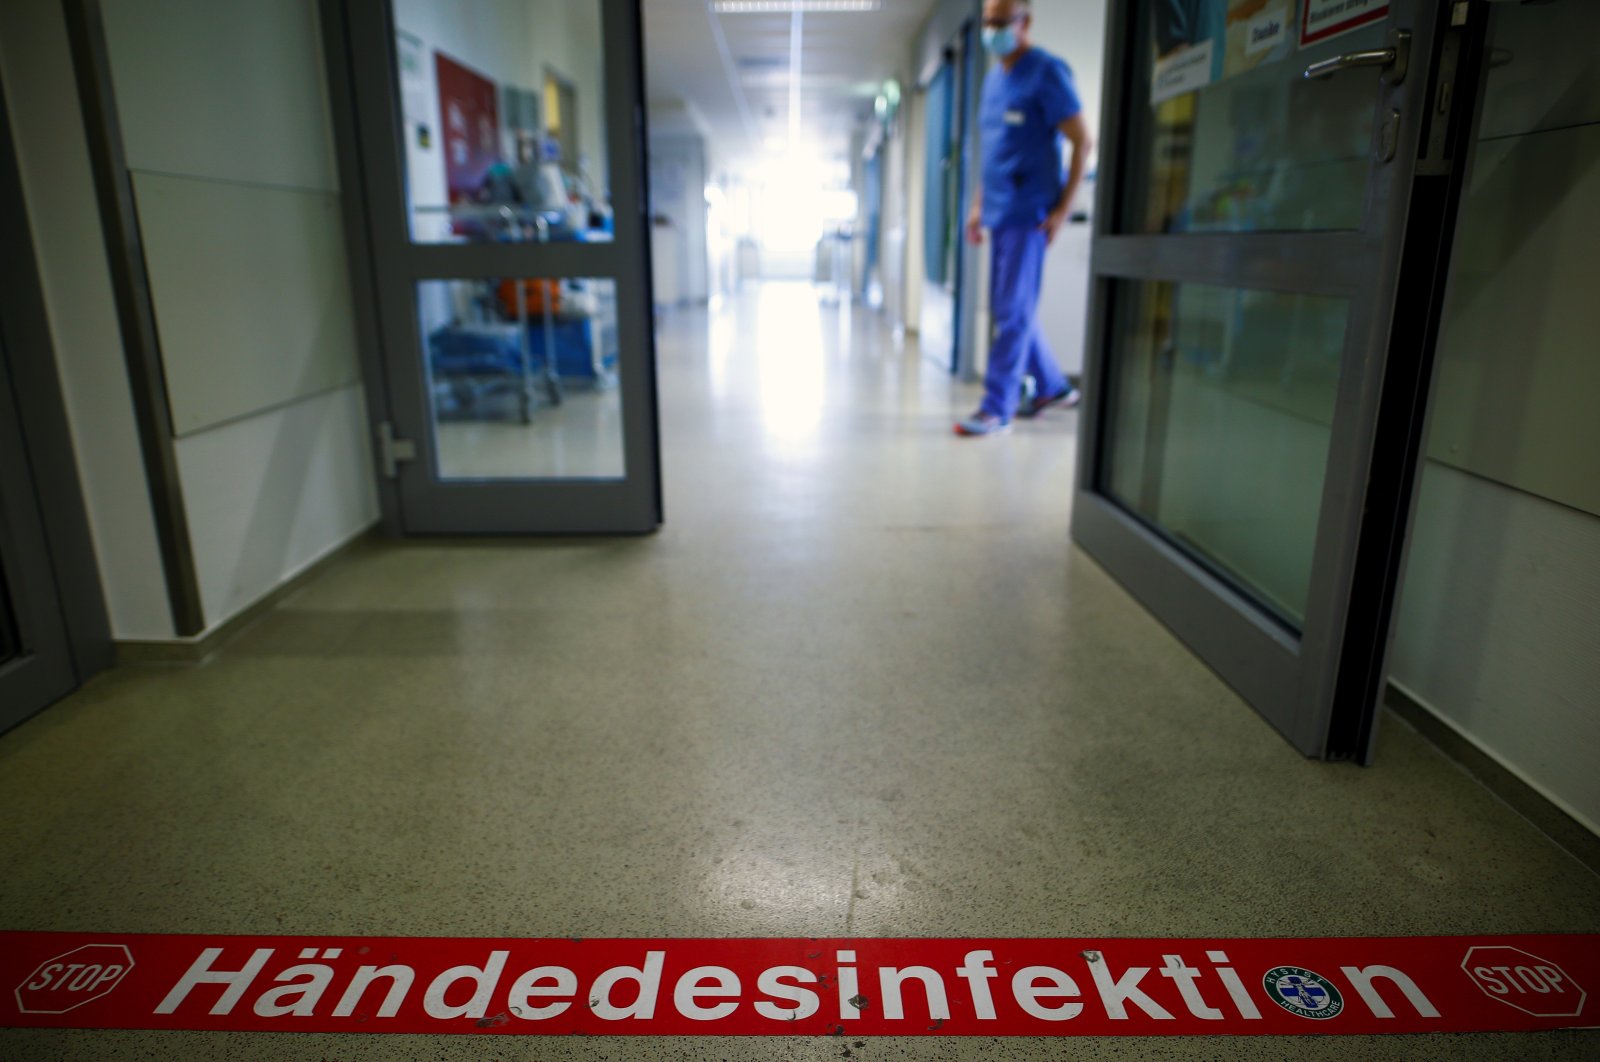 A member of the medical staff walks past a sign on the floor of an intensive care unit at the St.-Antonius-Hospital Eschweiler, Eschweiler, Sept. 25, 2020. (REUTERS Photo)